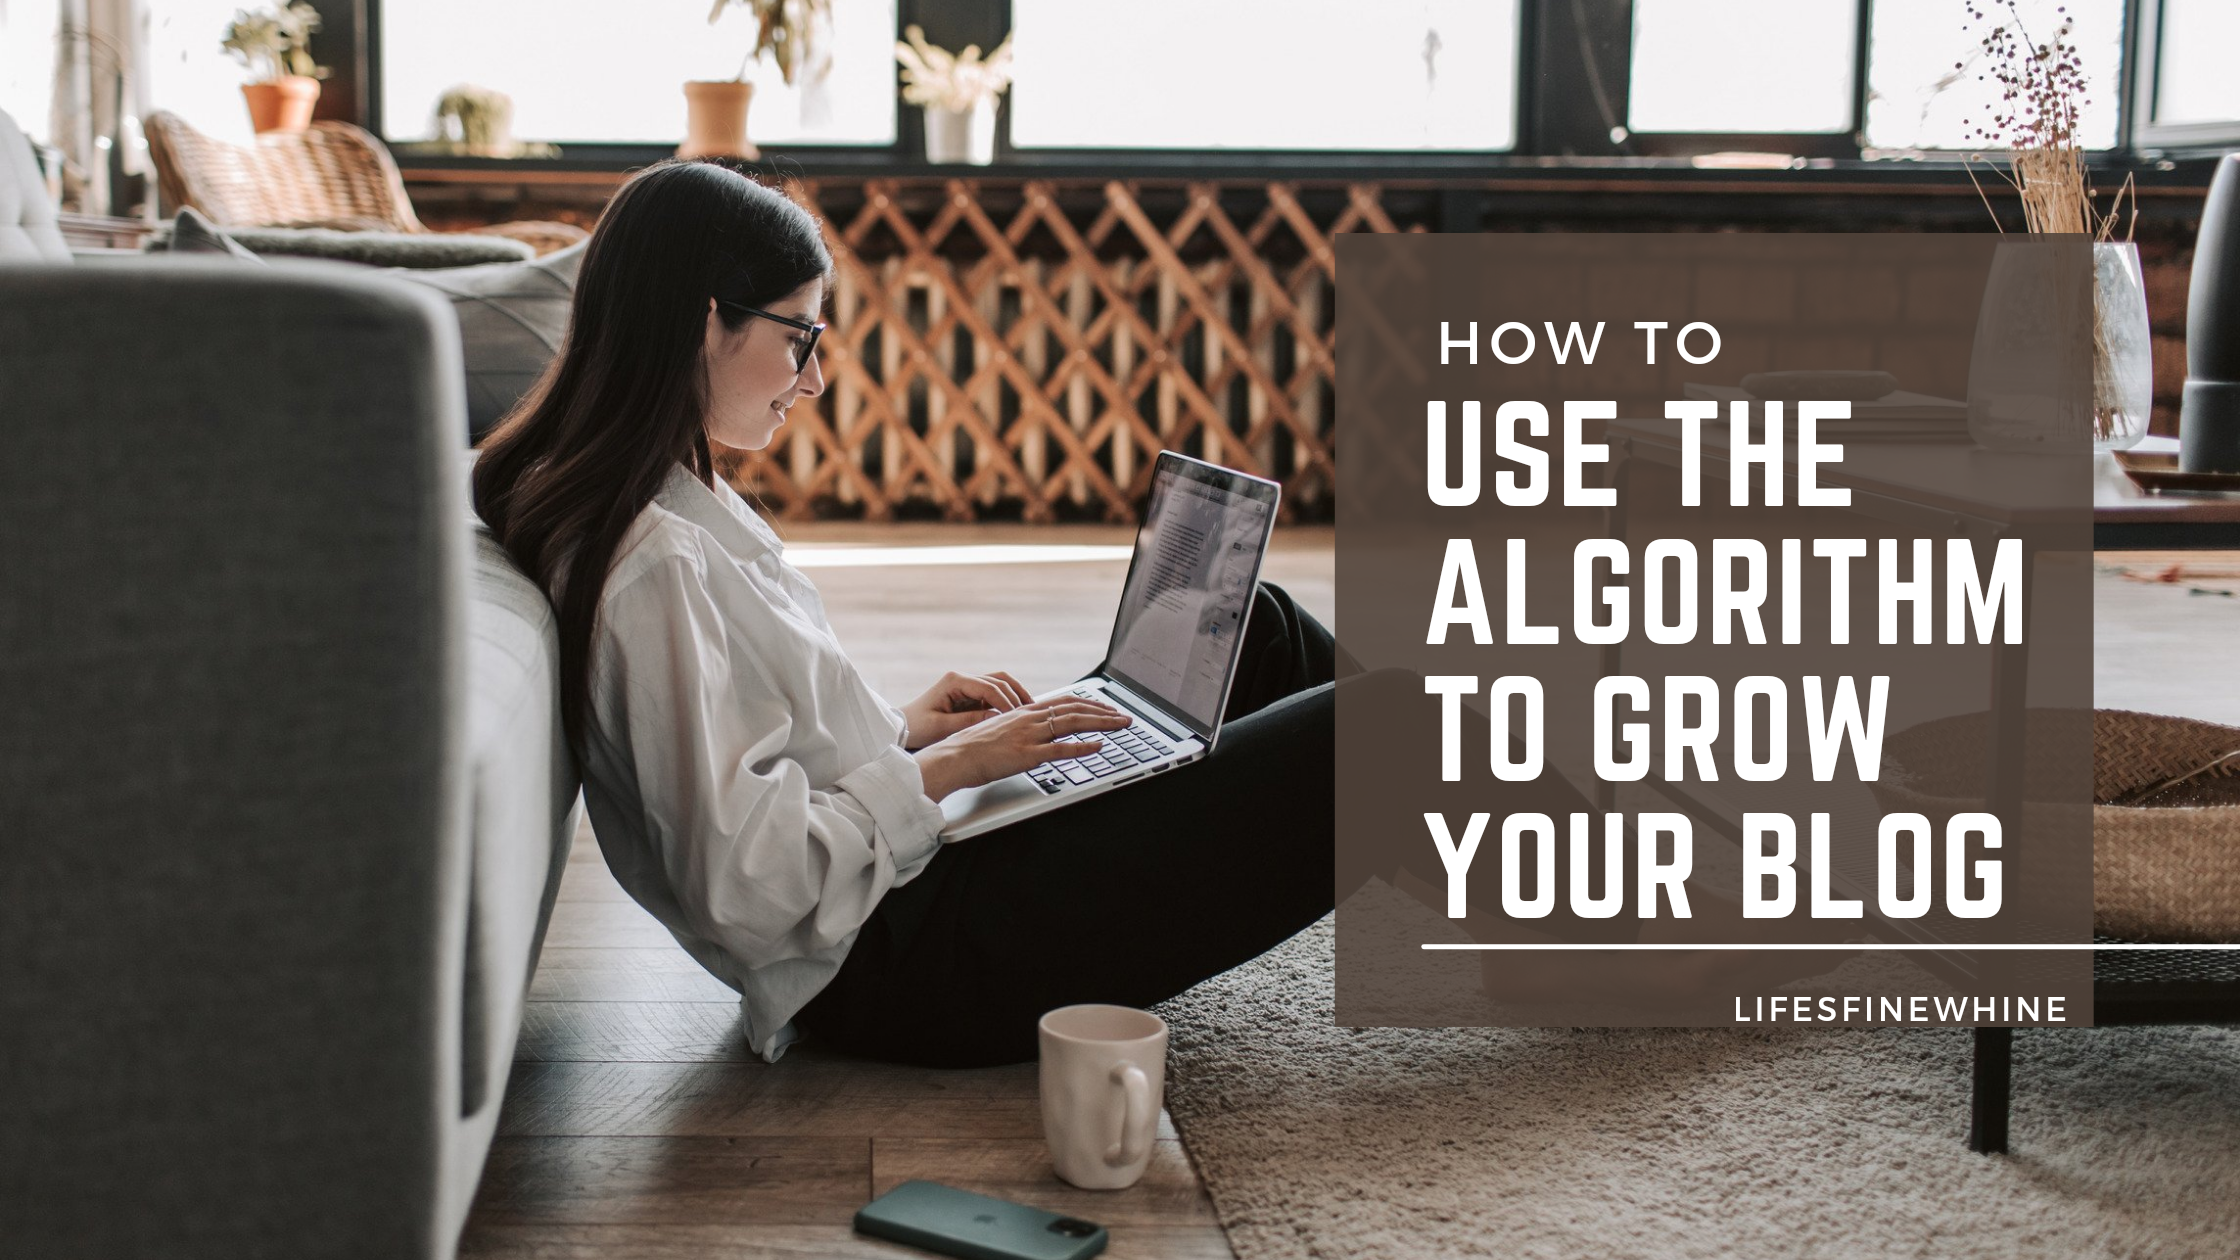 How To Use The Algorithm To Grow Your Blog